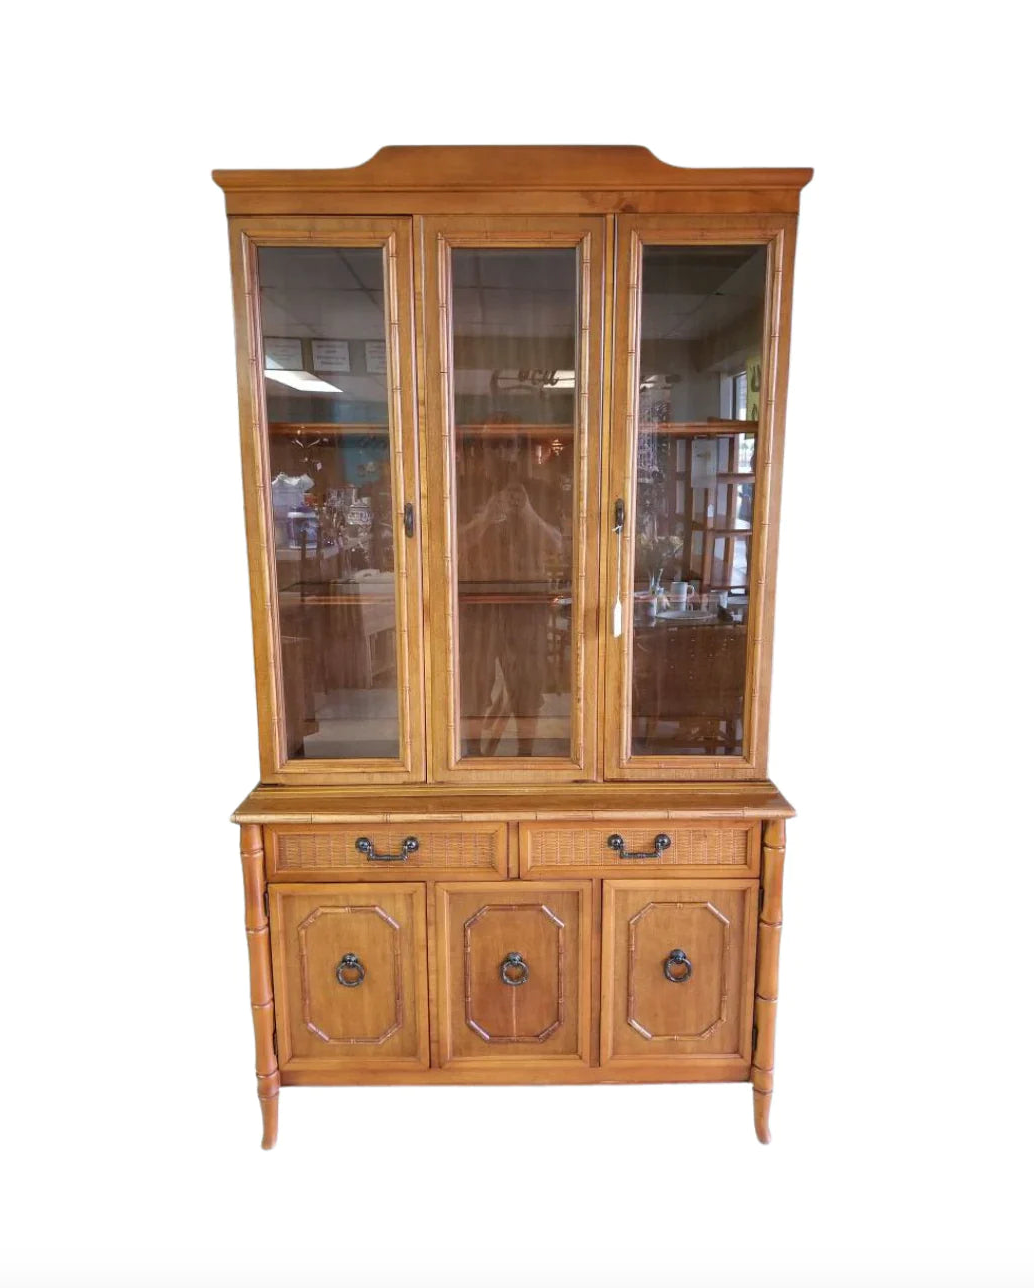 Vintage Broyhill Furniture Faux Bamboo Two Piece China Cabinet Available for Lacquer!